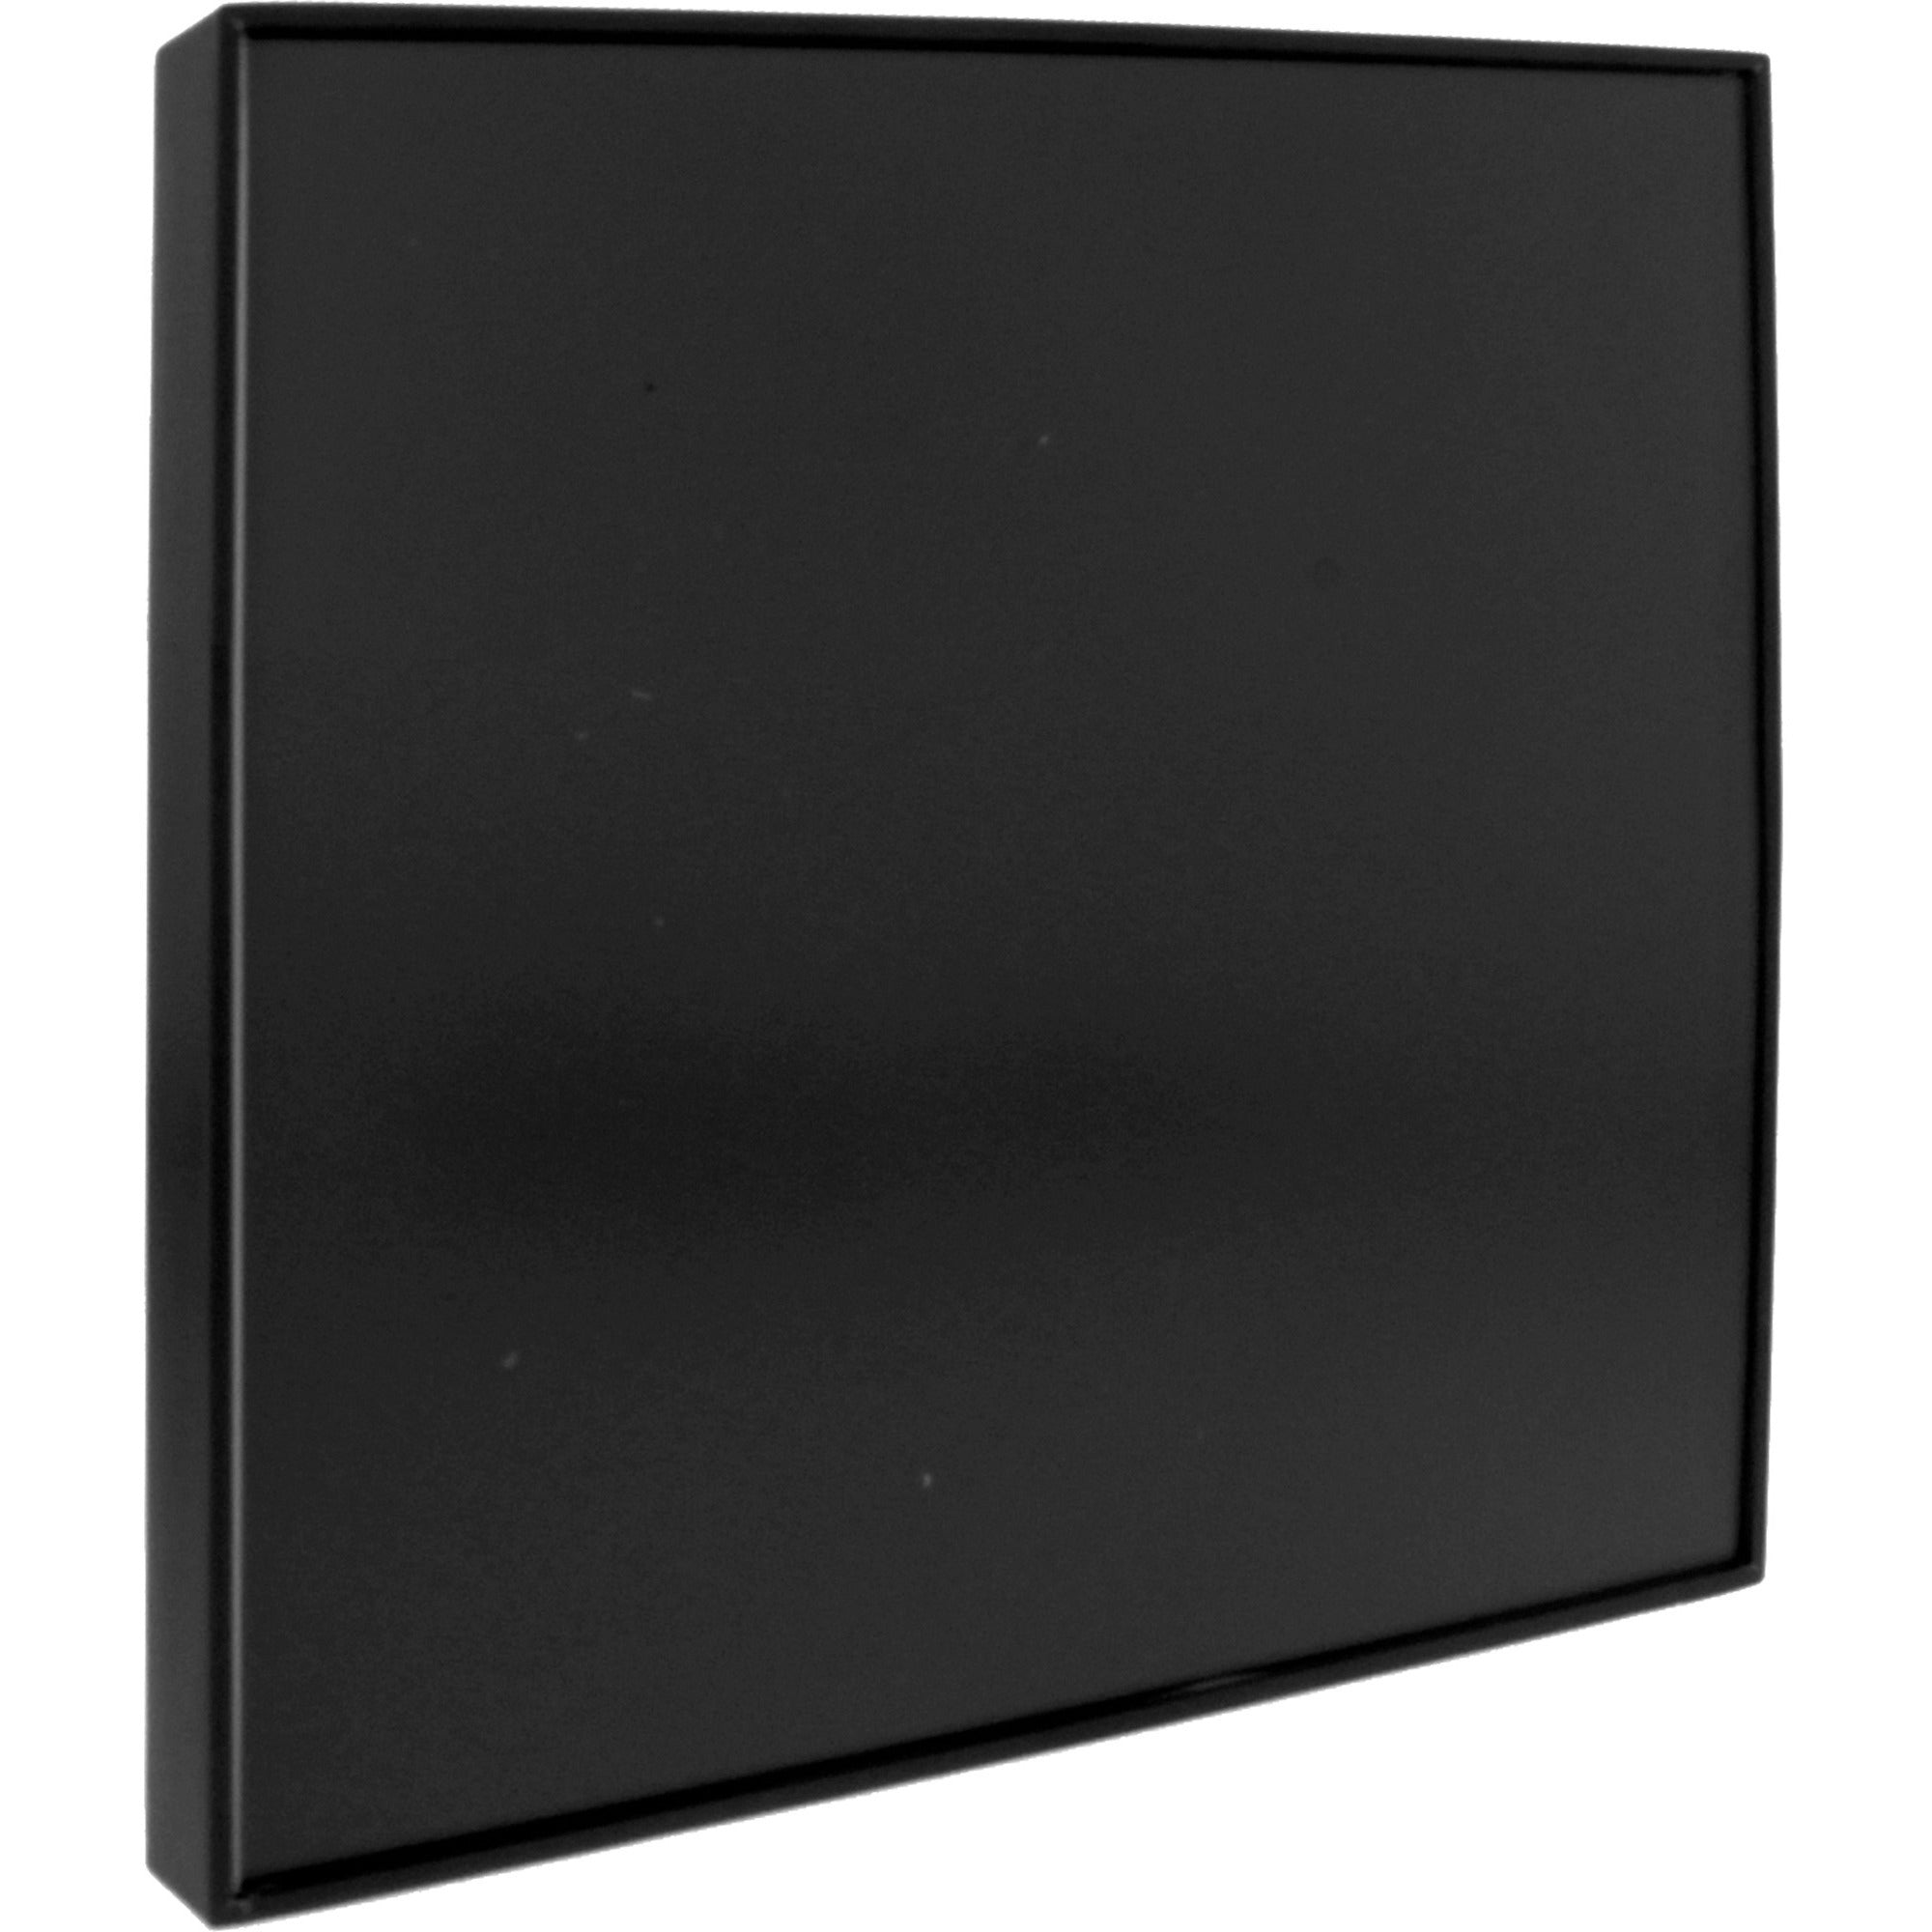 lorell-snap-plate-architectural-sign-1-each-10-width-x-10-height-square-shape-surface-mountable-easy-readability-injection-molded-easy-to-use-plastic-black_llr02652 - 1